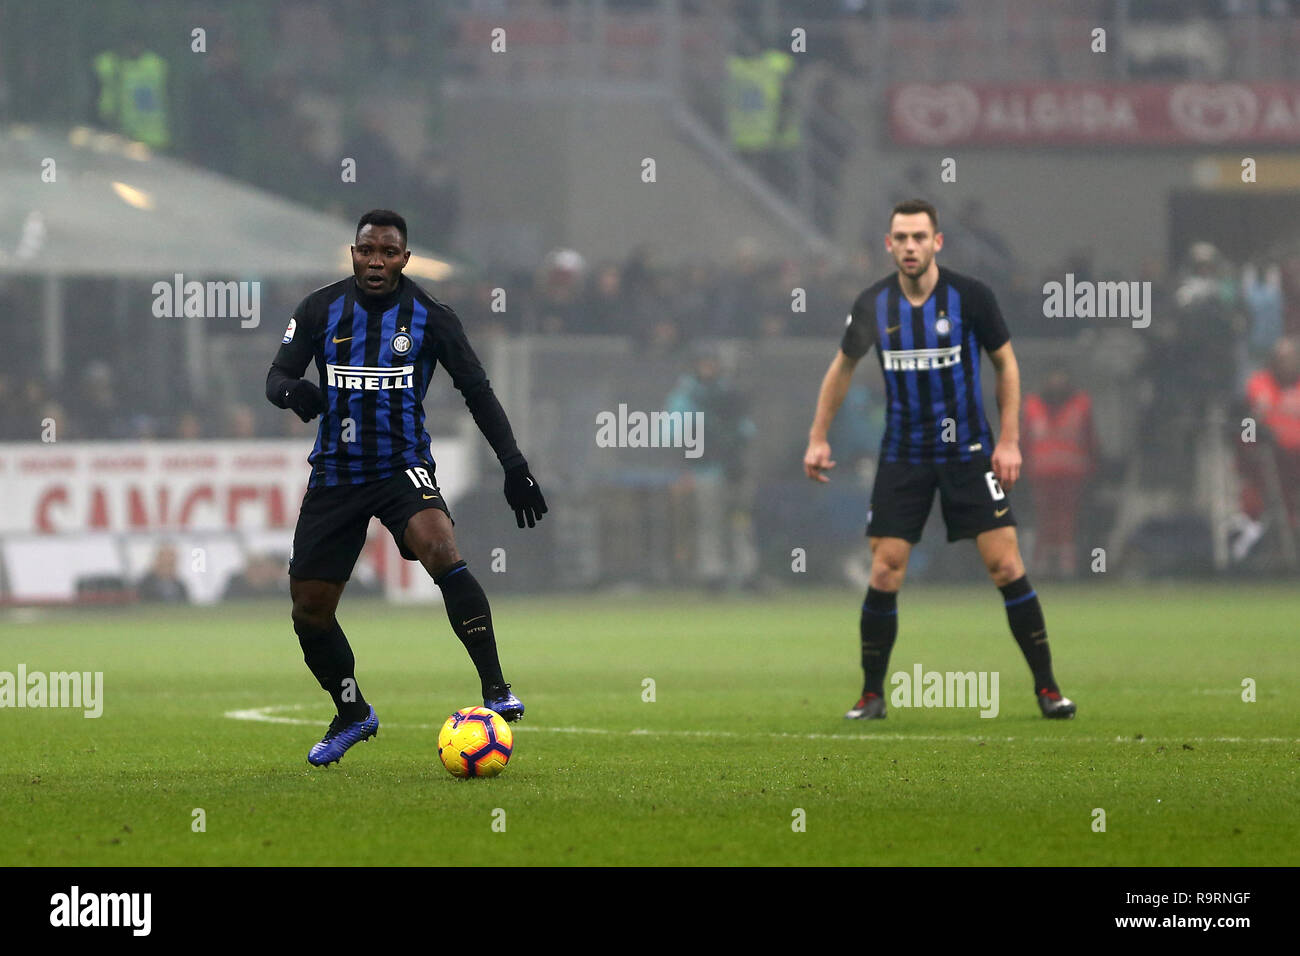 Milan, Italy. 26th Dec, 2018. Kwadwo Asamoah of FC Internazionale in action during the Serie A match between FC Internazionale and Ssc Napoli. Credit: Marco Canoniero/Alamy Live News Stock Photo